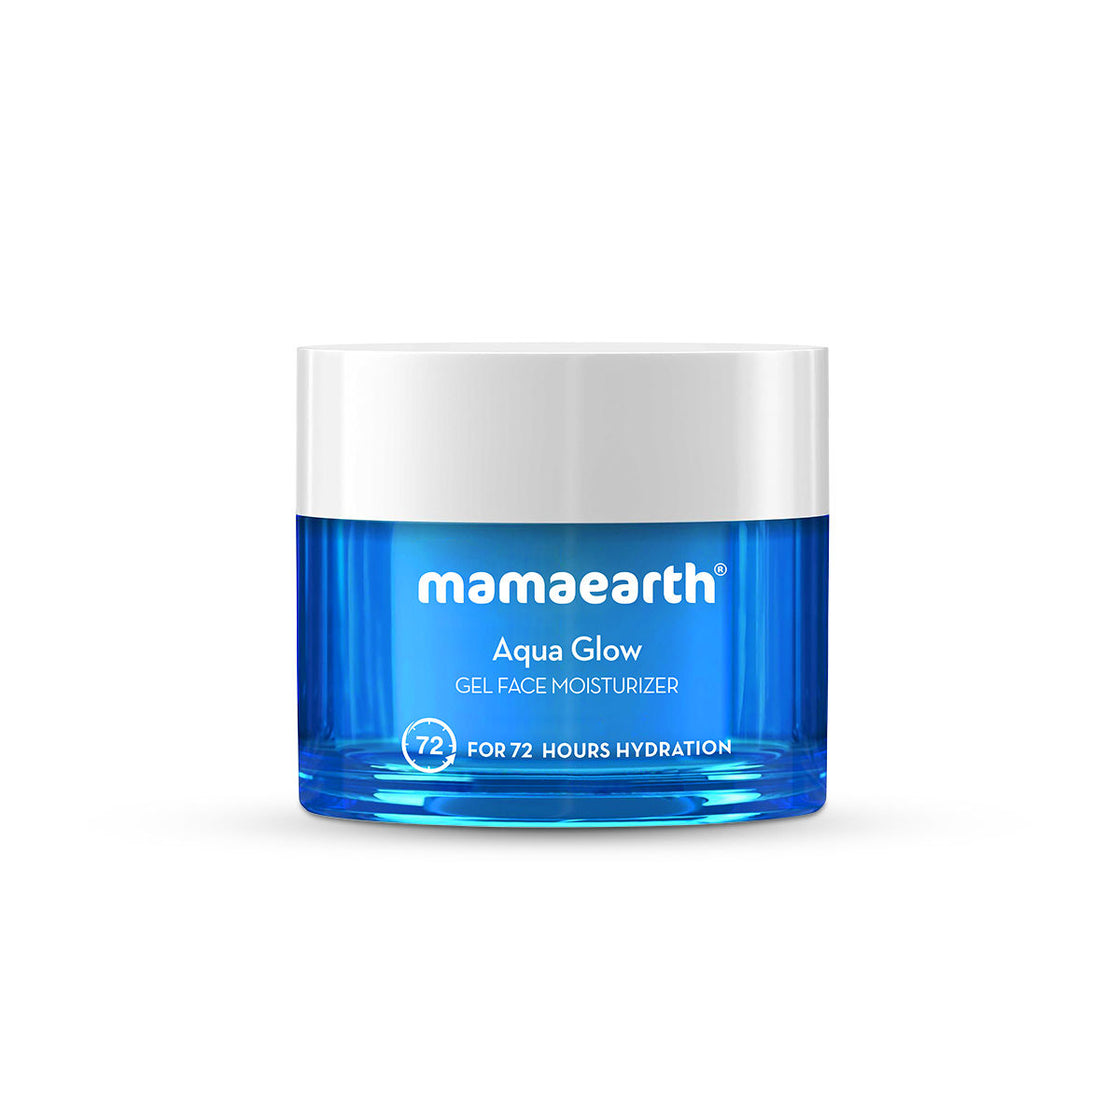 Mamaearth Aqua Glow Gel Face Moisturizer With Himalayan Thermal Water&Hyaluronic Acid For 72 Hours-7